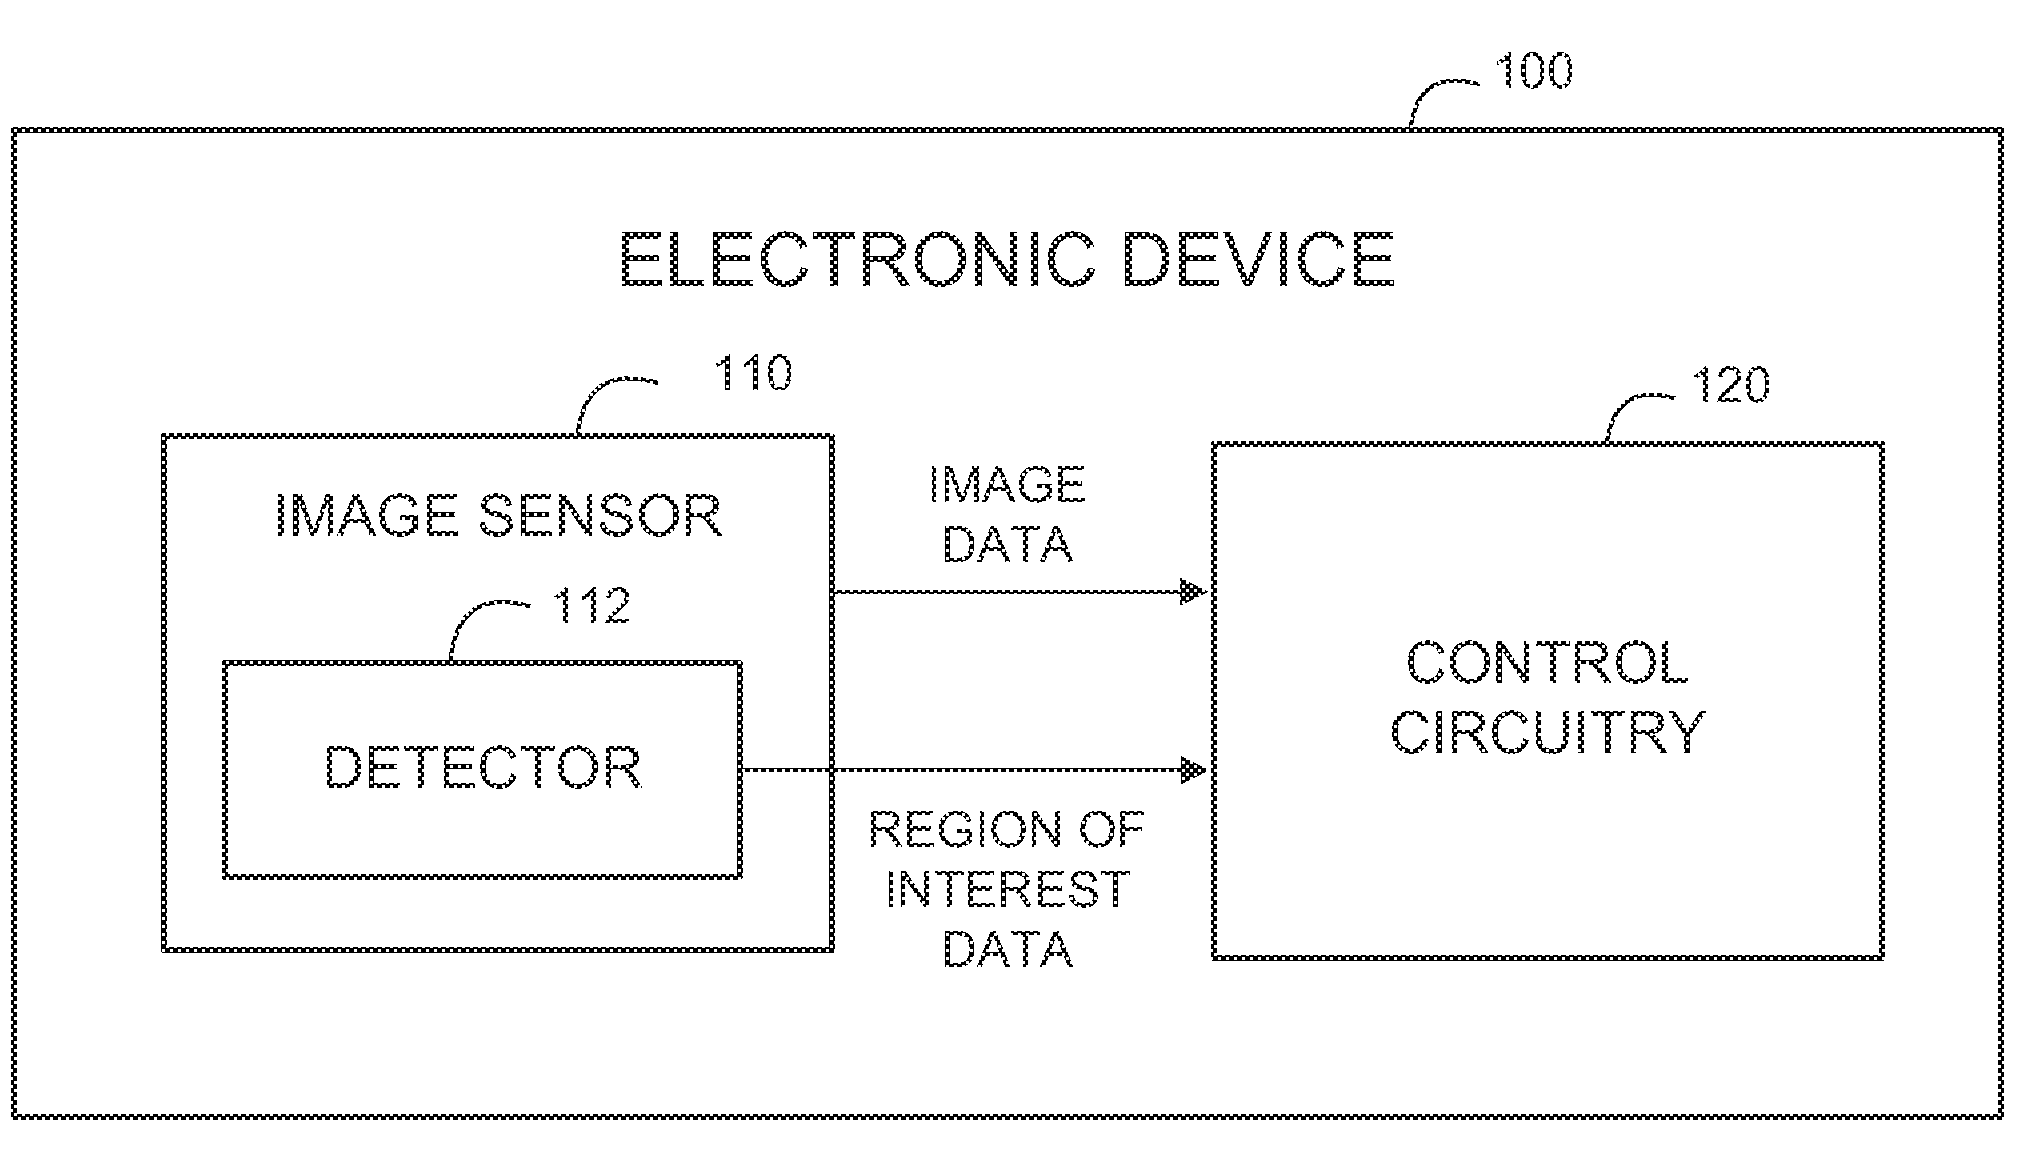 Object detection using an in-sensor detector